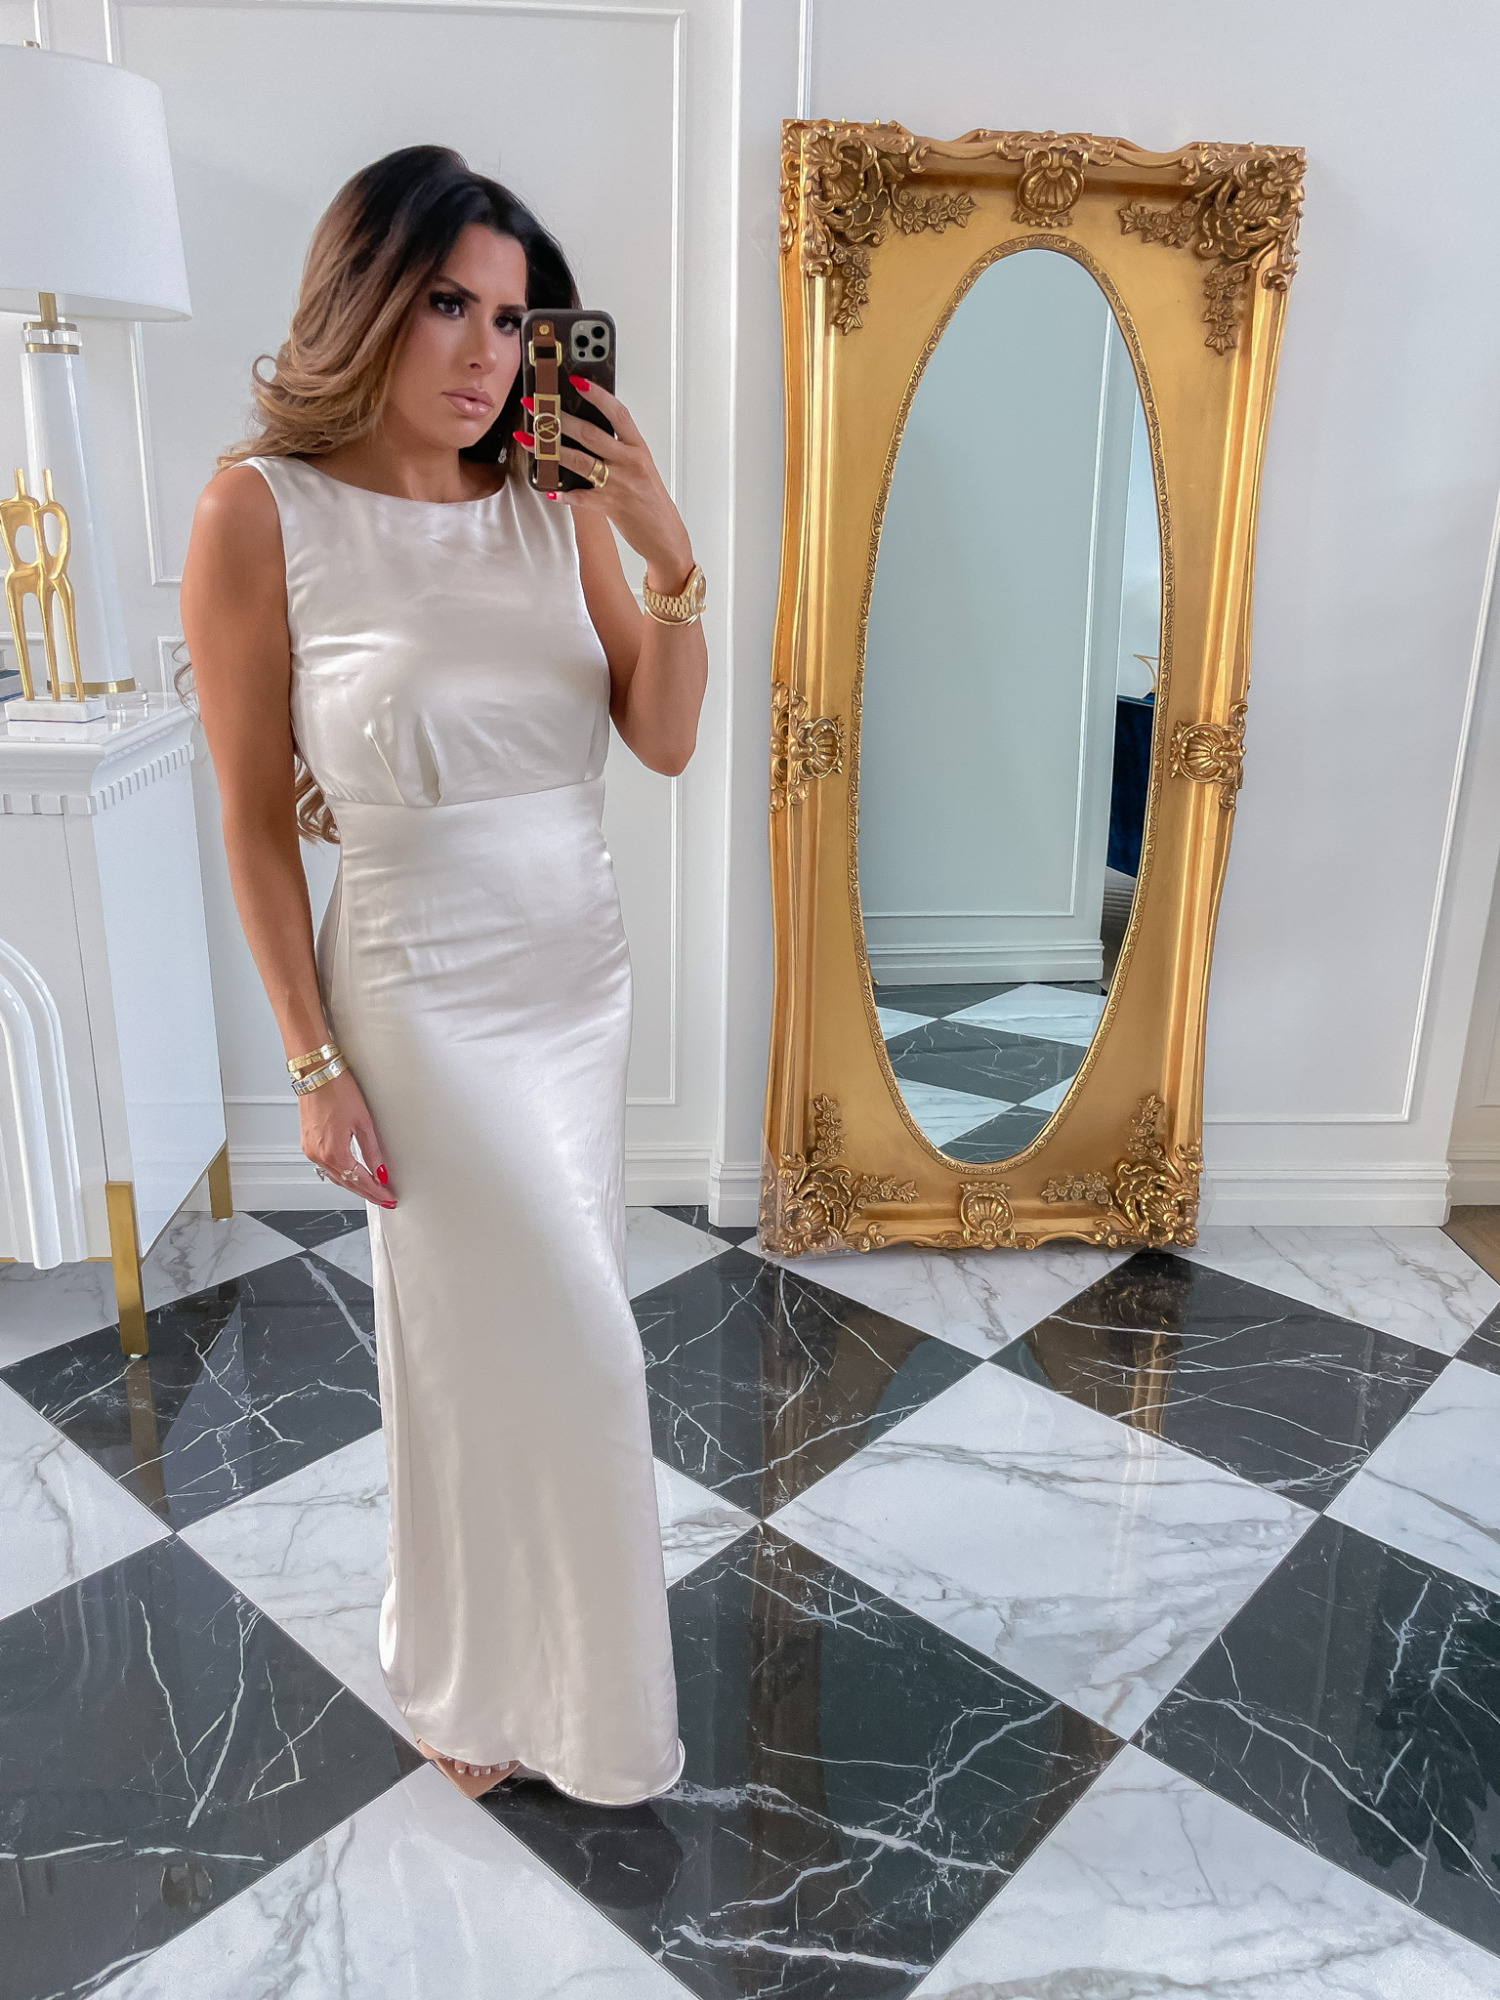 Red Dress Try On Haul, Fall Dresses, Fall Outfit Ideas, Wedding Guest Looks, Emily Ann Gemma, Pre-Fall Transitional Outfit Ideas |  Instagram Recap by popular US life and style blog, The Sweetest Thing: image of Emily Gemma wearing a White sating sleeveless maxi dress